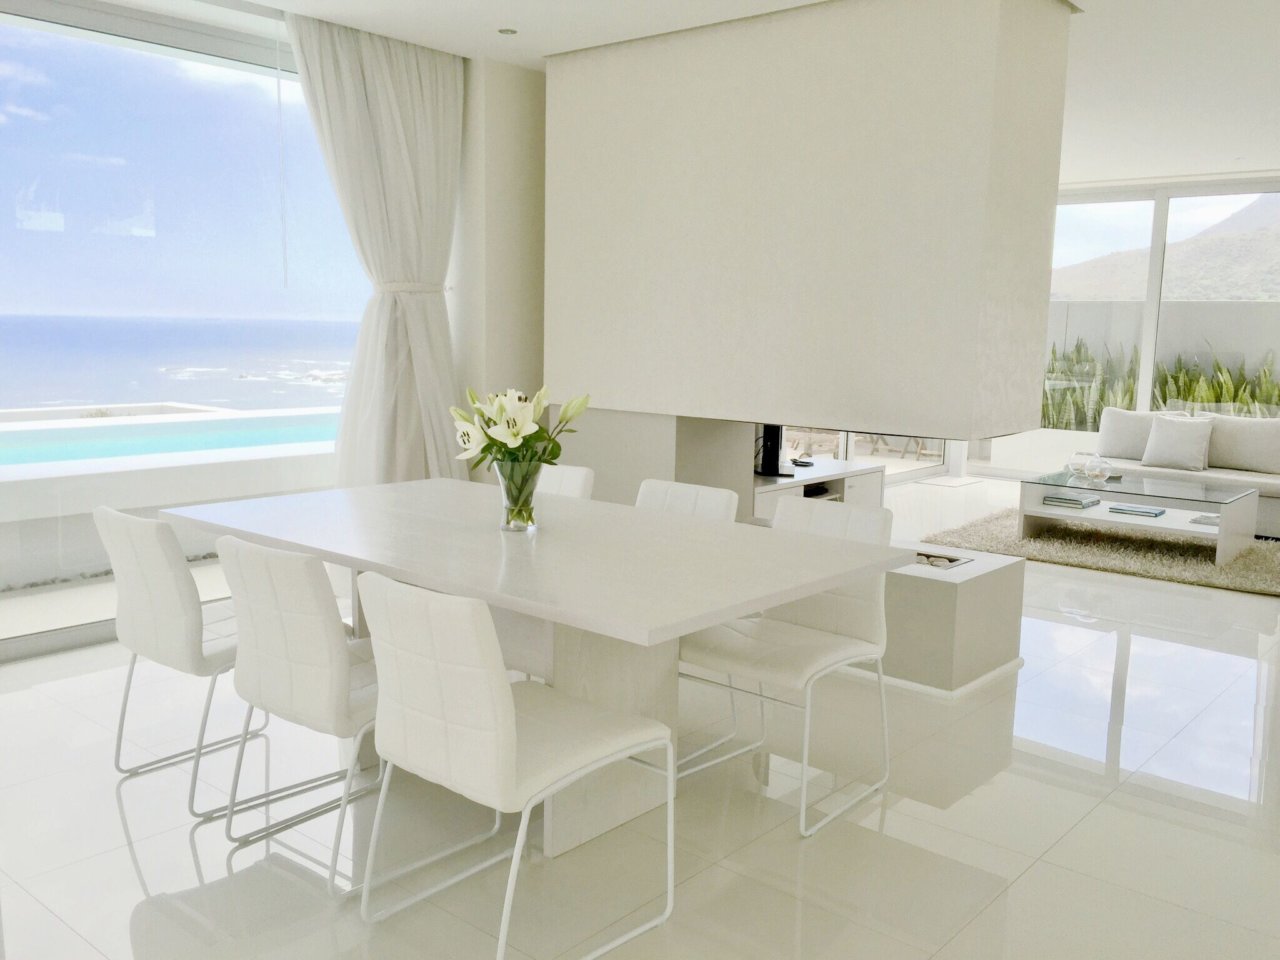 Photo 34 of Aqua Villa accommodation in Camps Bay, Cape Town with 5 bedrooms and 5 bathrooms